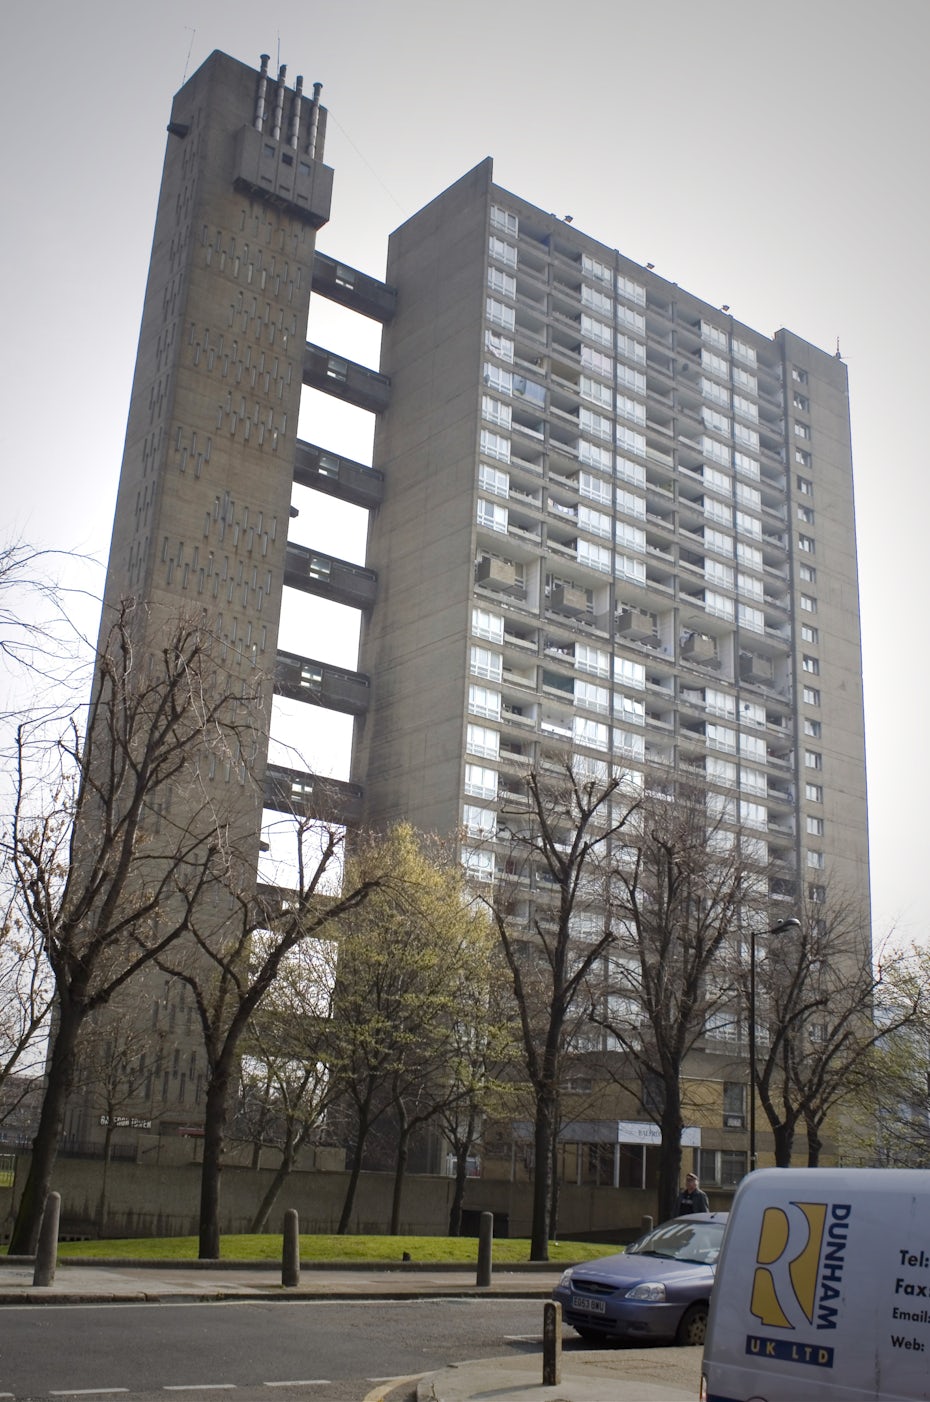 The Balfron Tower in London